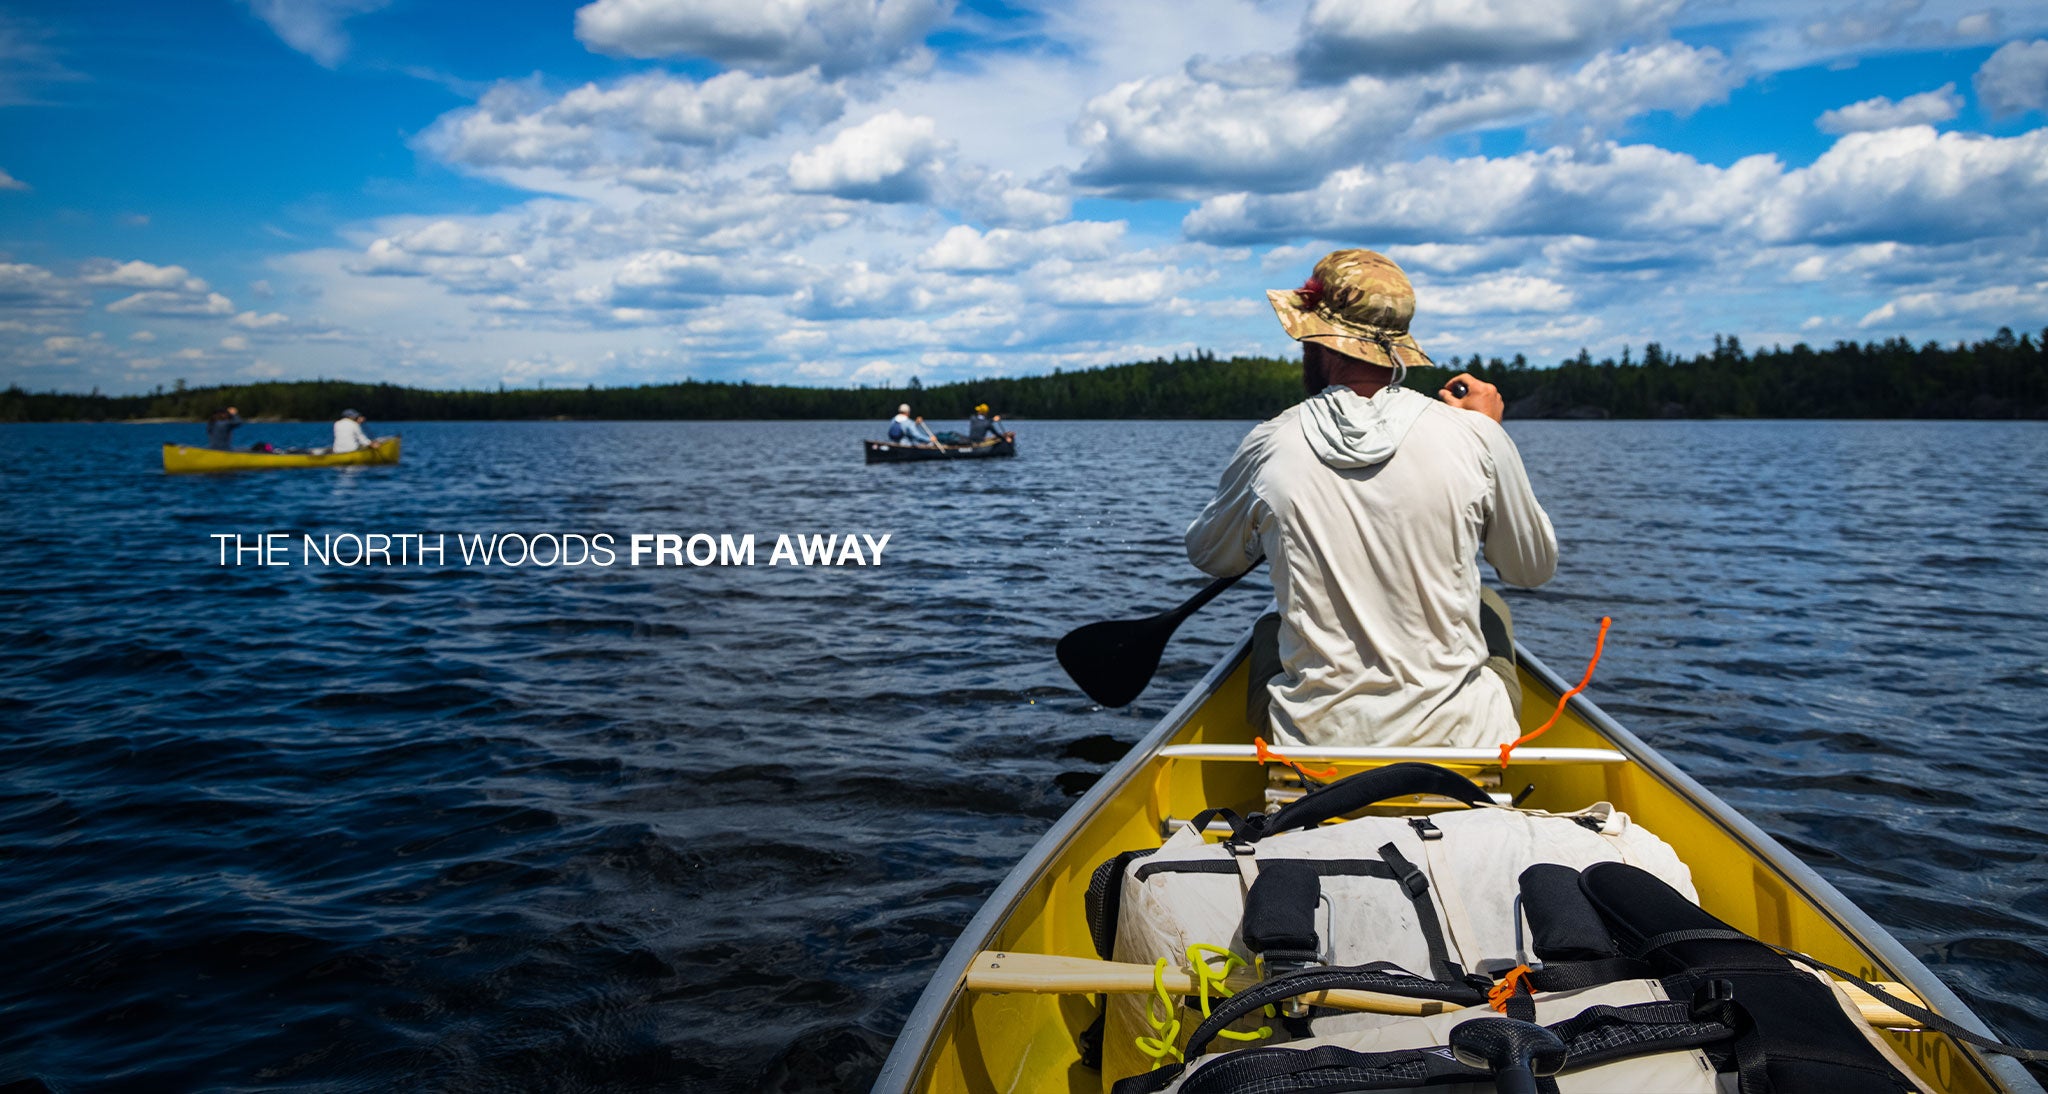 Q&A: The North Woods From Away – An Ultralight Canoe Trip in Northern Minnesota